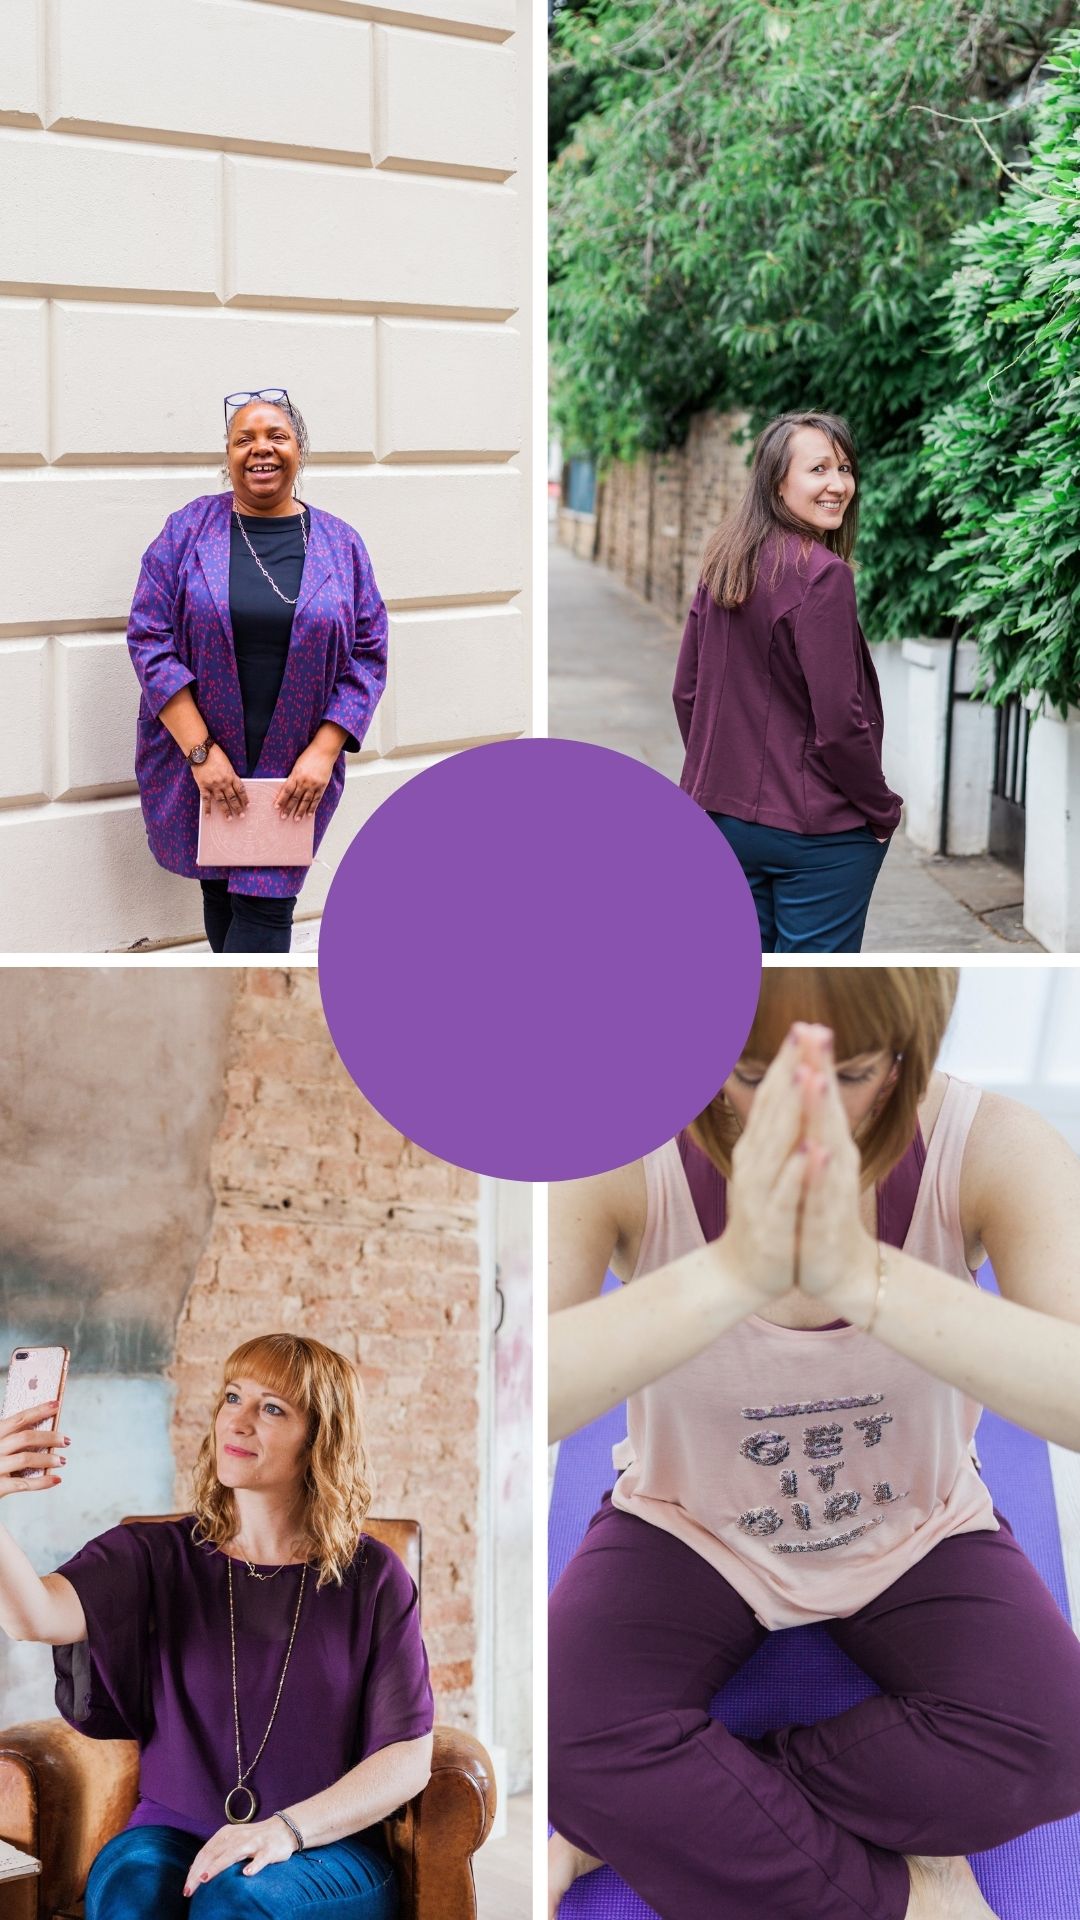 4 images of ladies wearing purple for their brand shoot. images by London brand photographer AKP branding stories